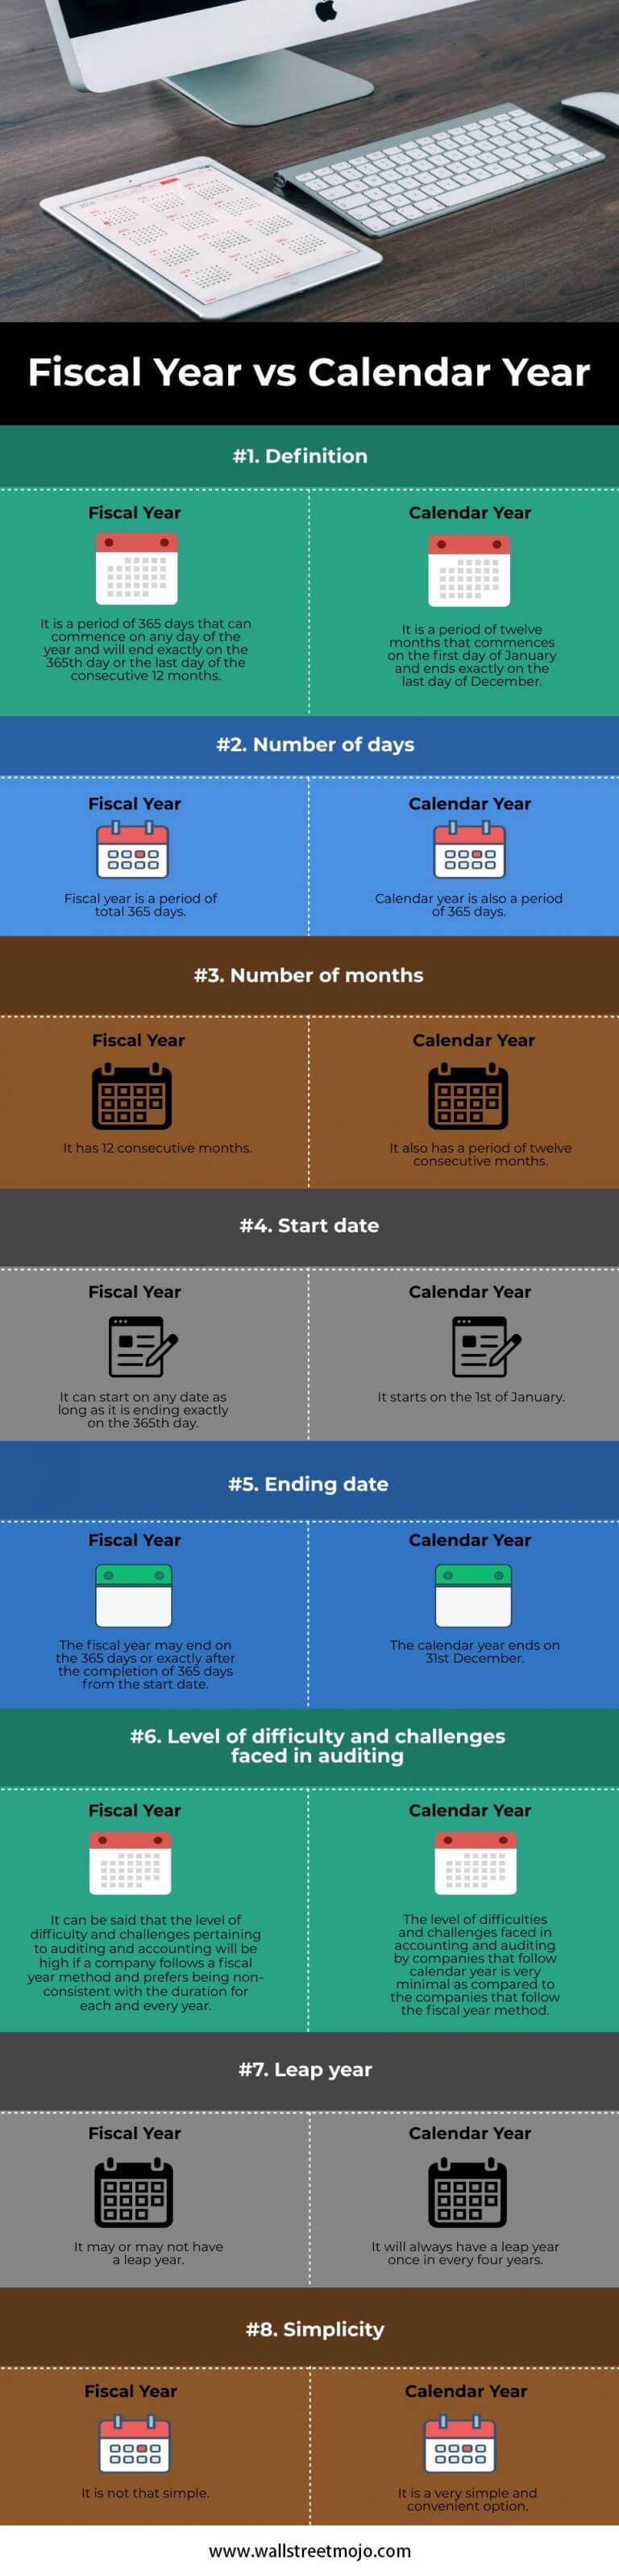 Fiscal Year vs Calendar Year Top 8 Differences You Must Know!